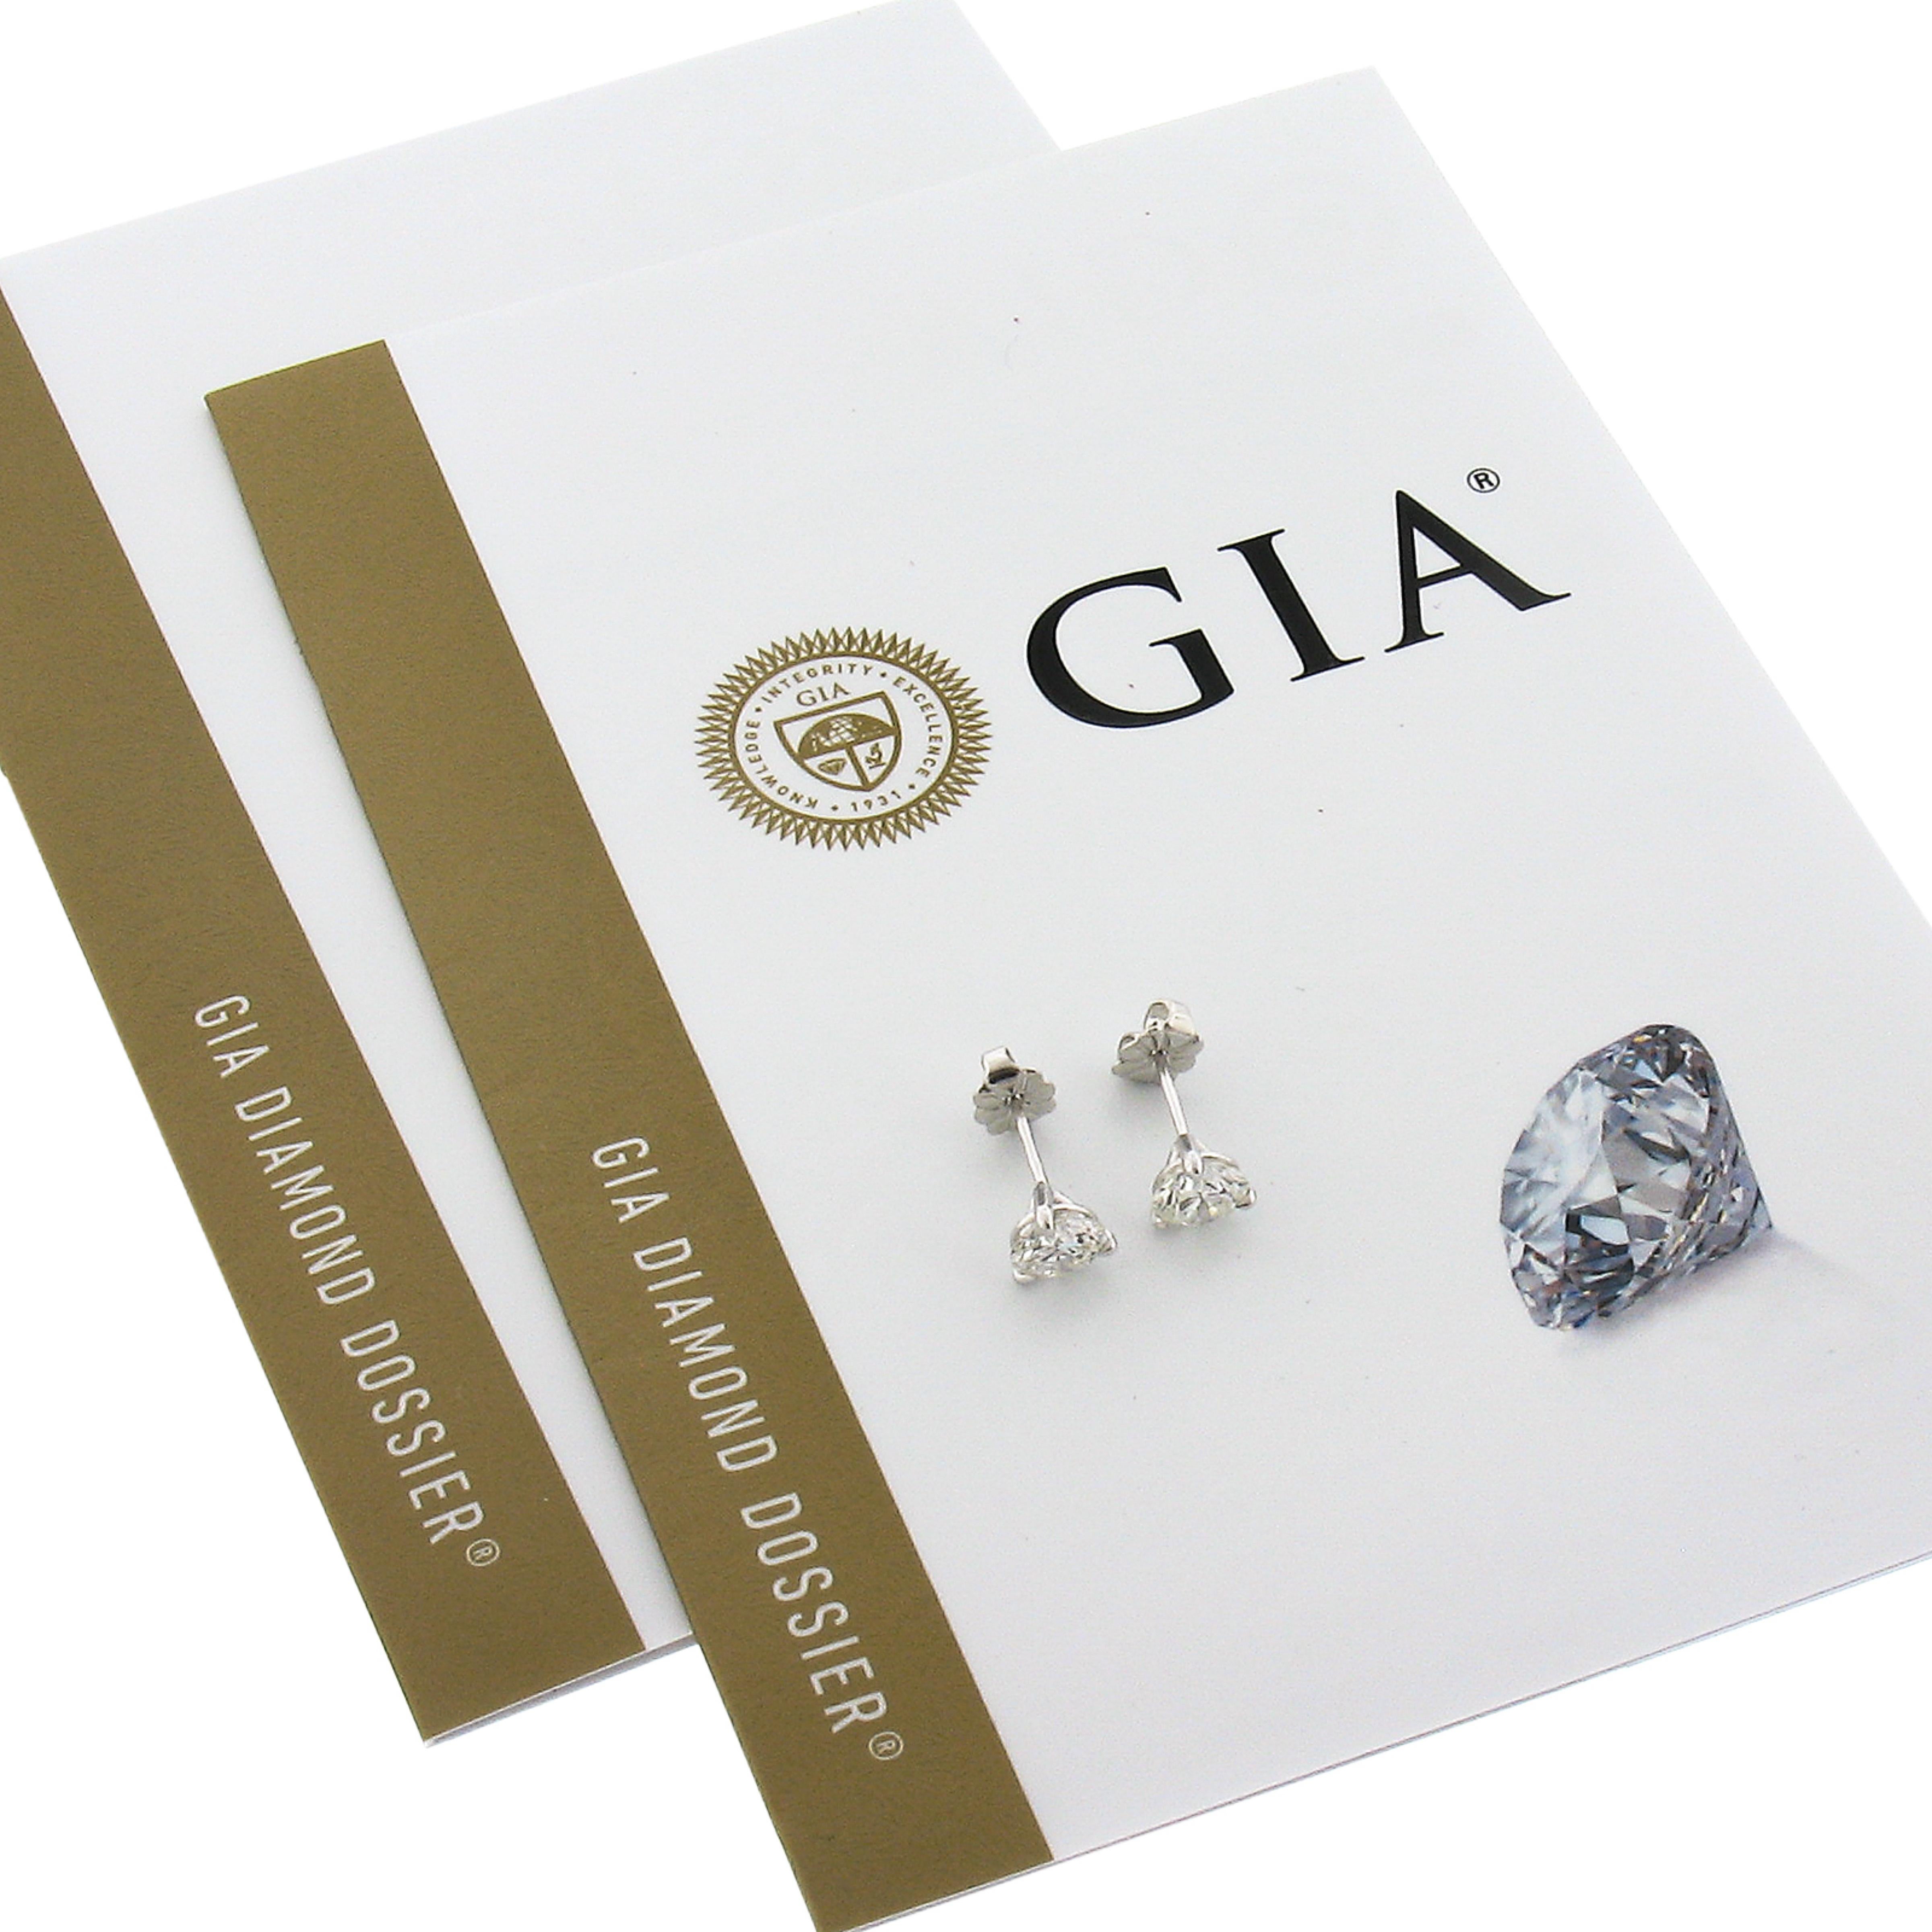 This classic pair of diamond stud earrings is newly crafted in solid platinum and features two gorgeous round brilliant cut diamonds that are both GIA certified. These diamonds weigh 0.76 each and are near colorless and very clean stones with (G/H